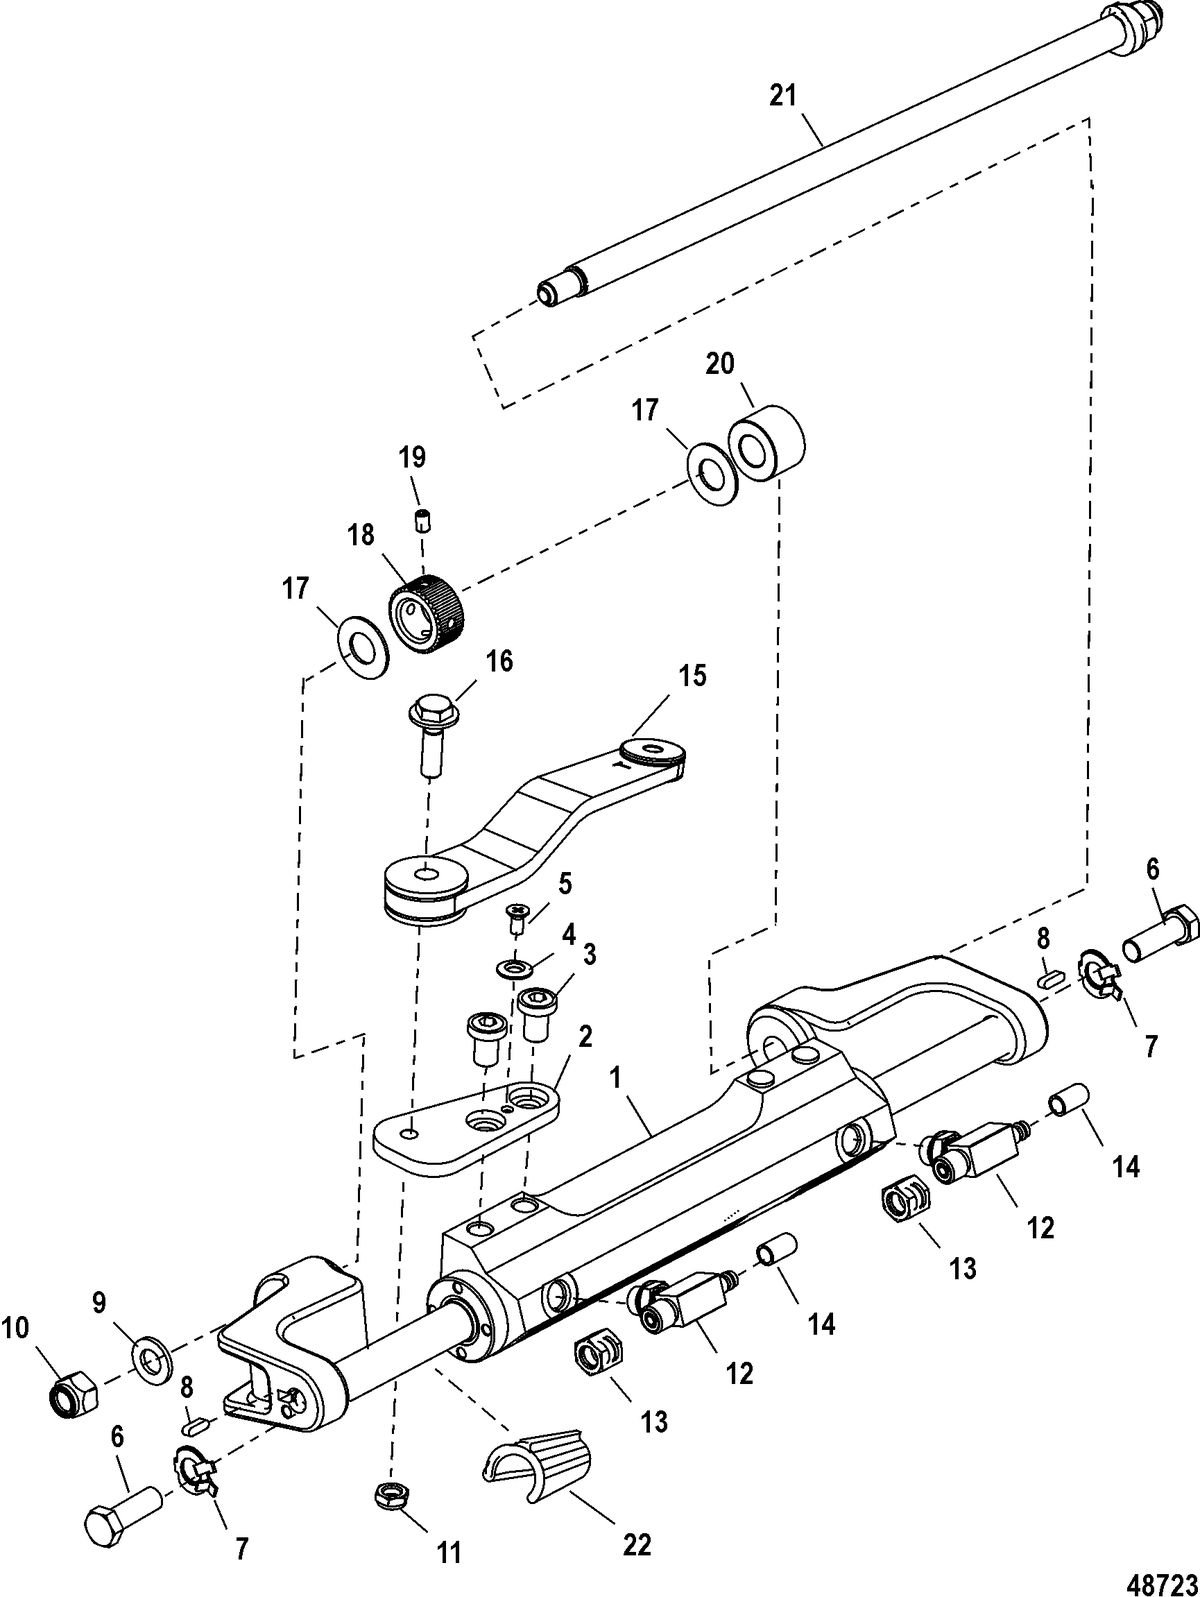 ACCESSORIES STEERING SYSTEMS AND COMPONENTS Steering Actuator Assembly - F150(8M0058944)